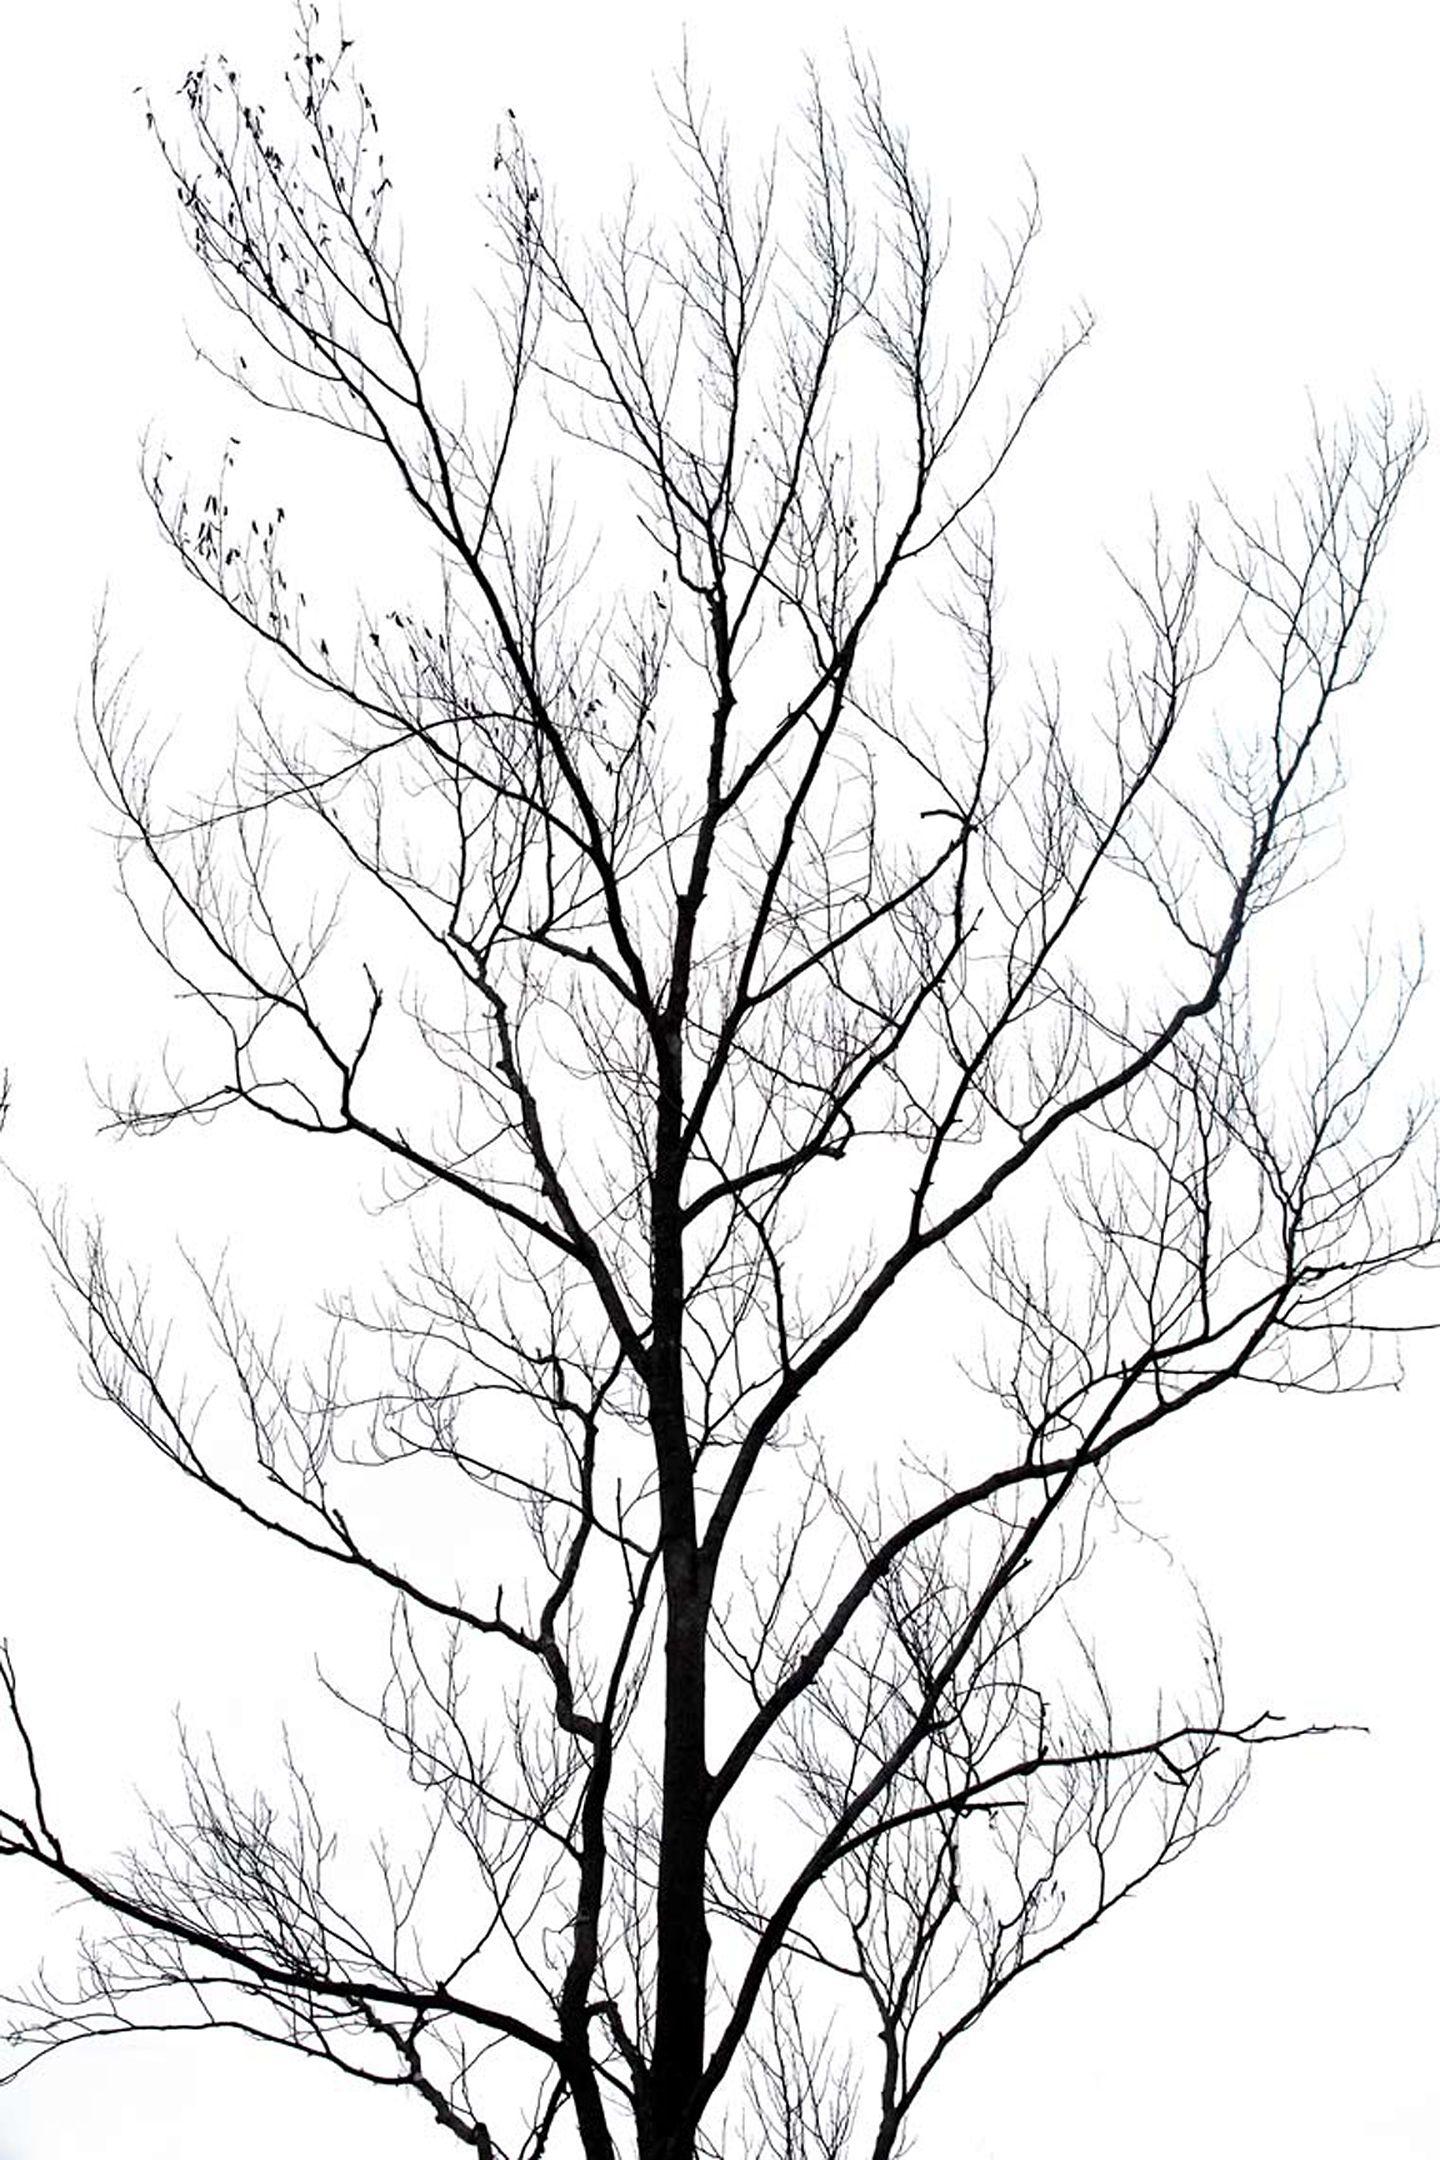 Michael Filonow Black and White Photograph - Winter Trees 4, Photograph, Archival Ink Jet